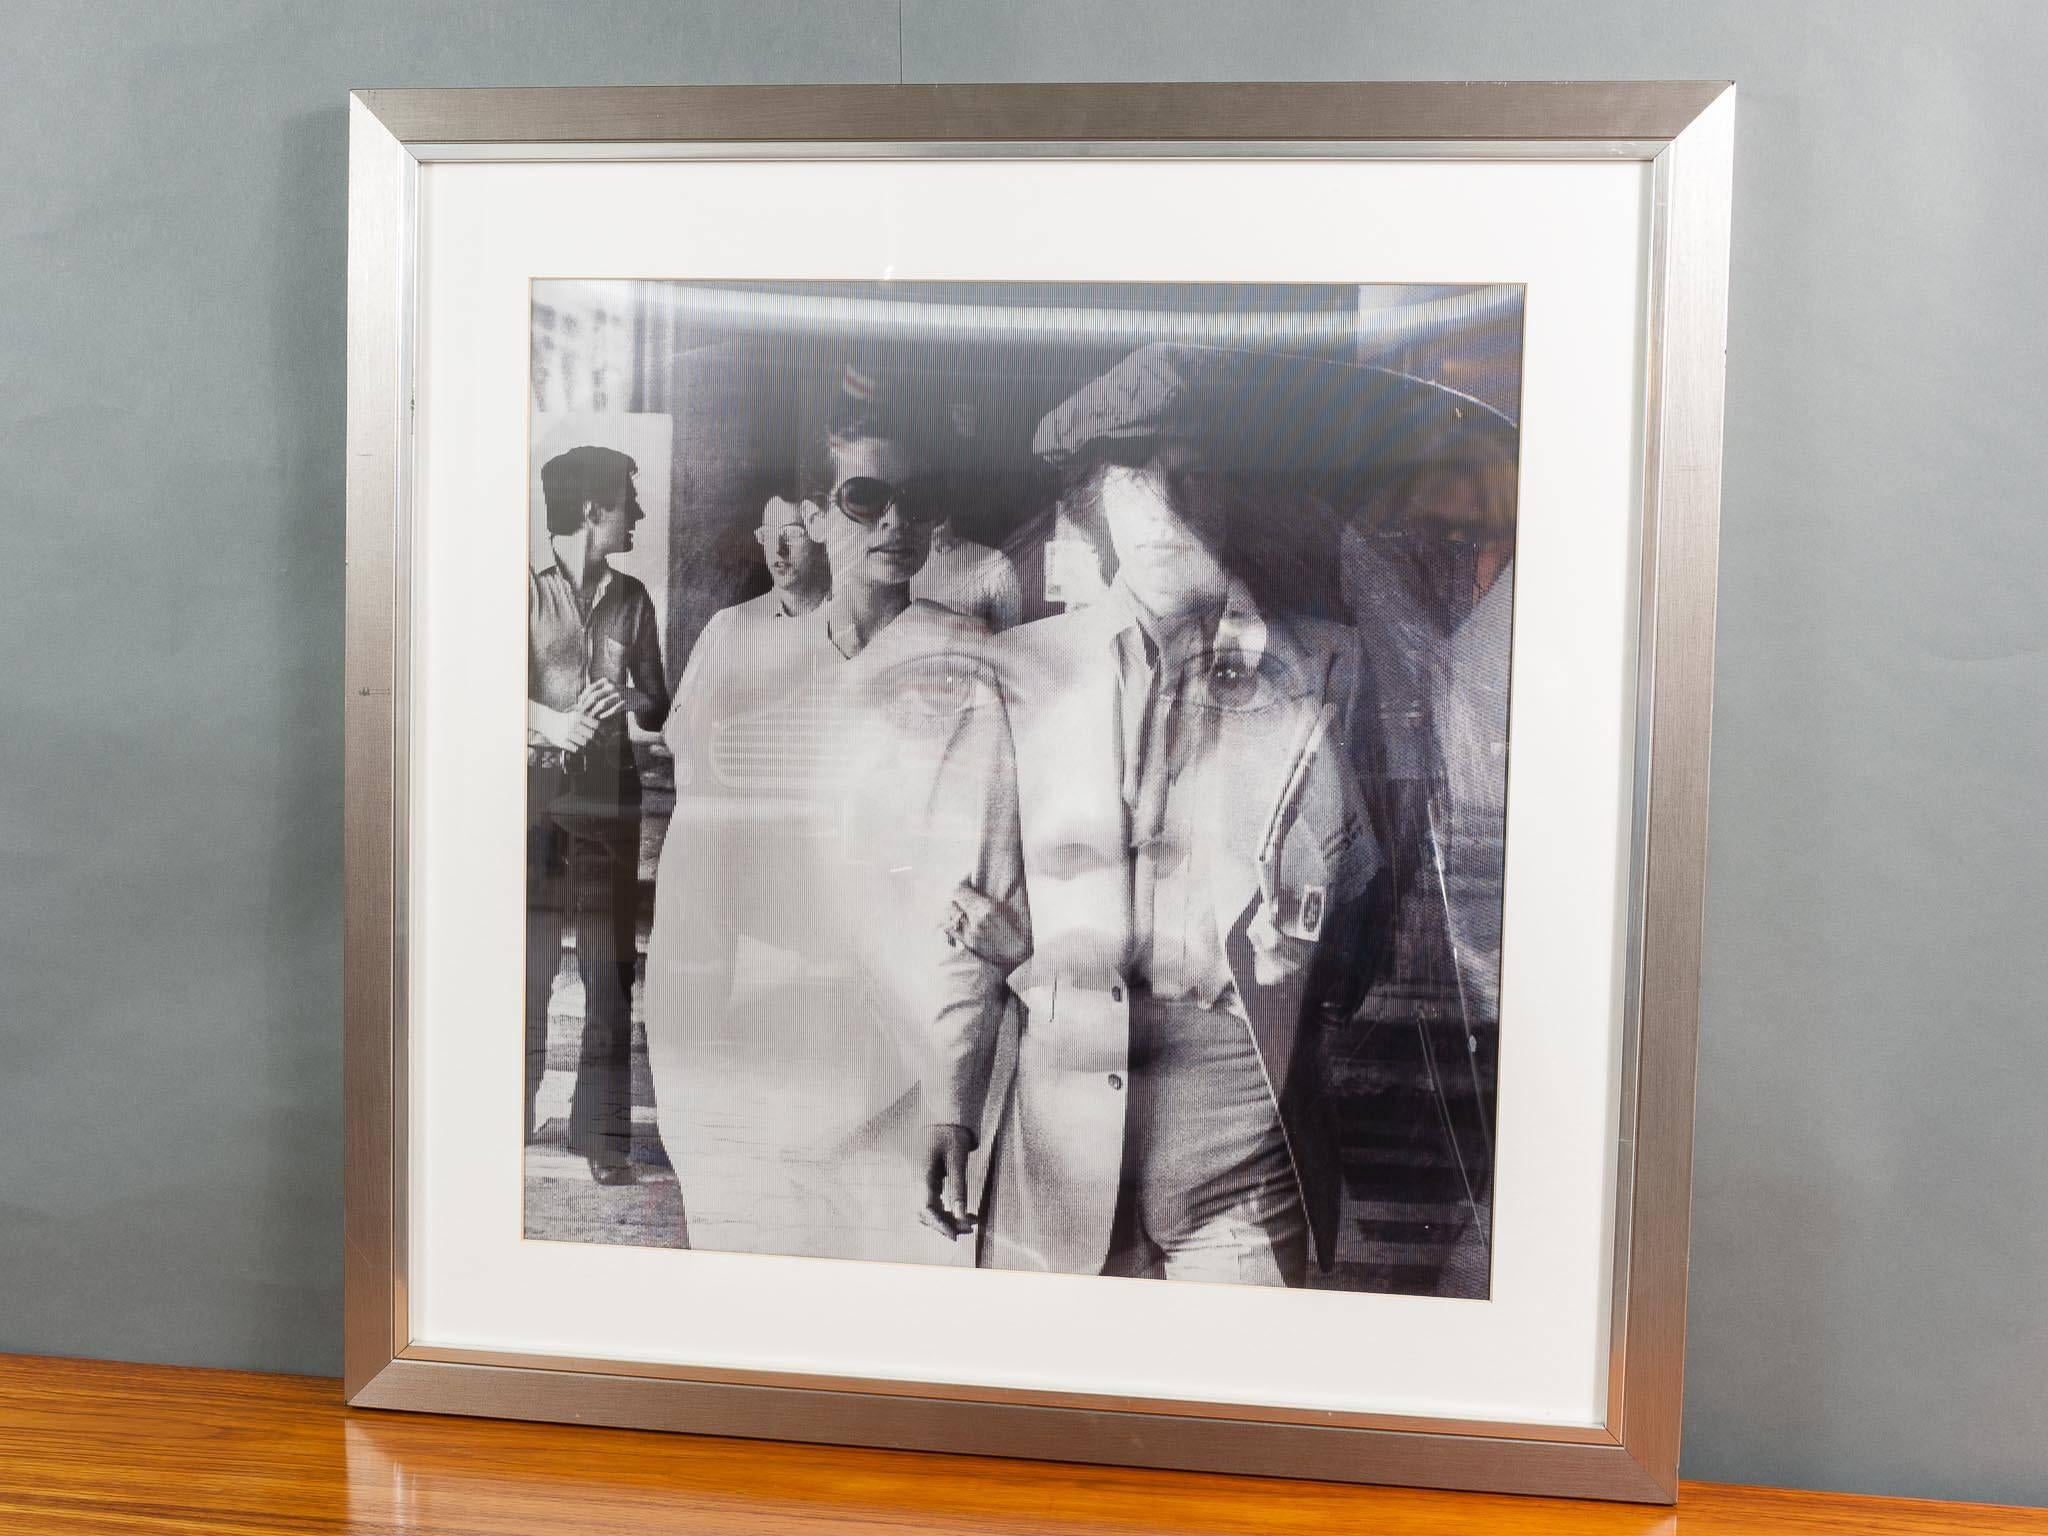 British Mick Jagger Black and White Framed Lenticular by Matthew Andrews